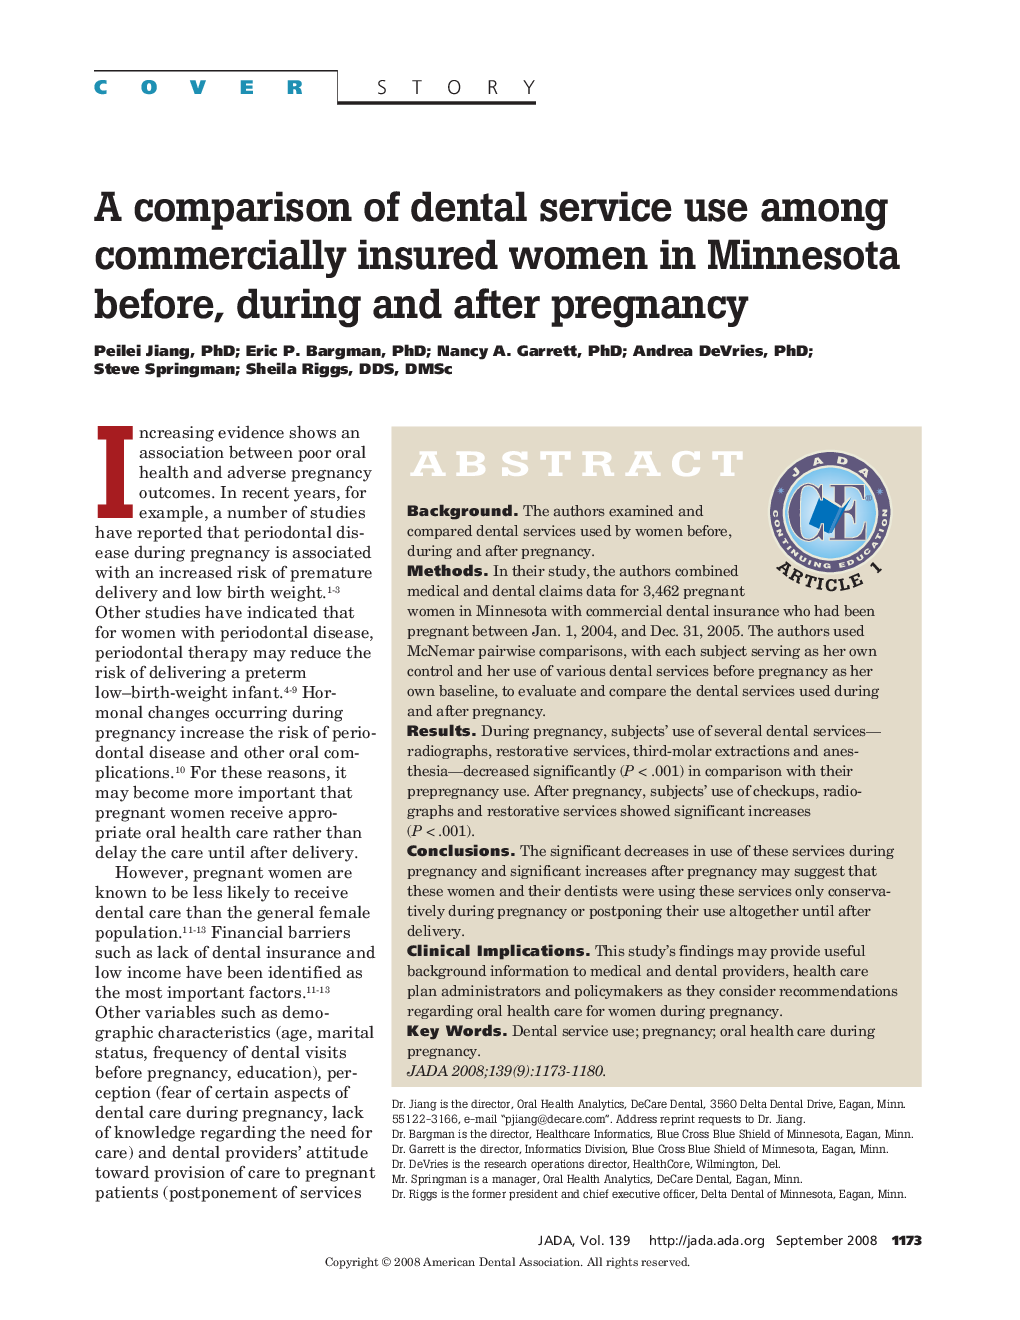 A Comparison of Dental Service Use Among Commercially Insured Women in Minnesota Before, During and After Pregnancy